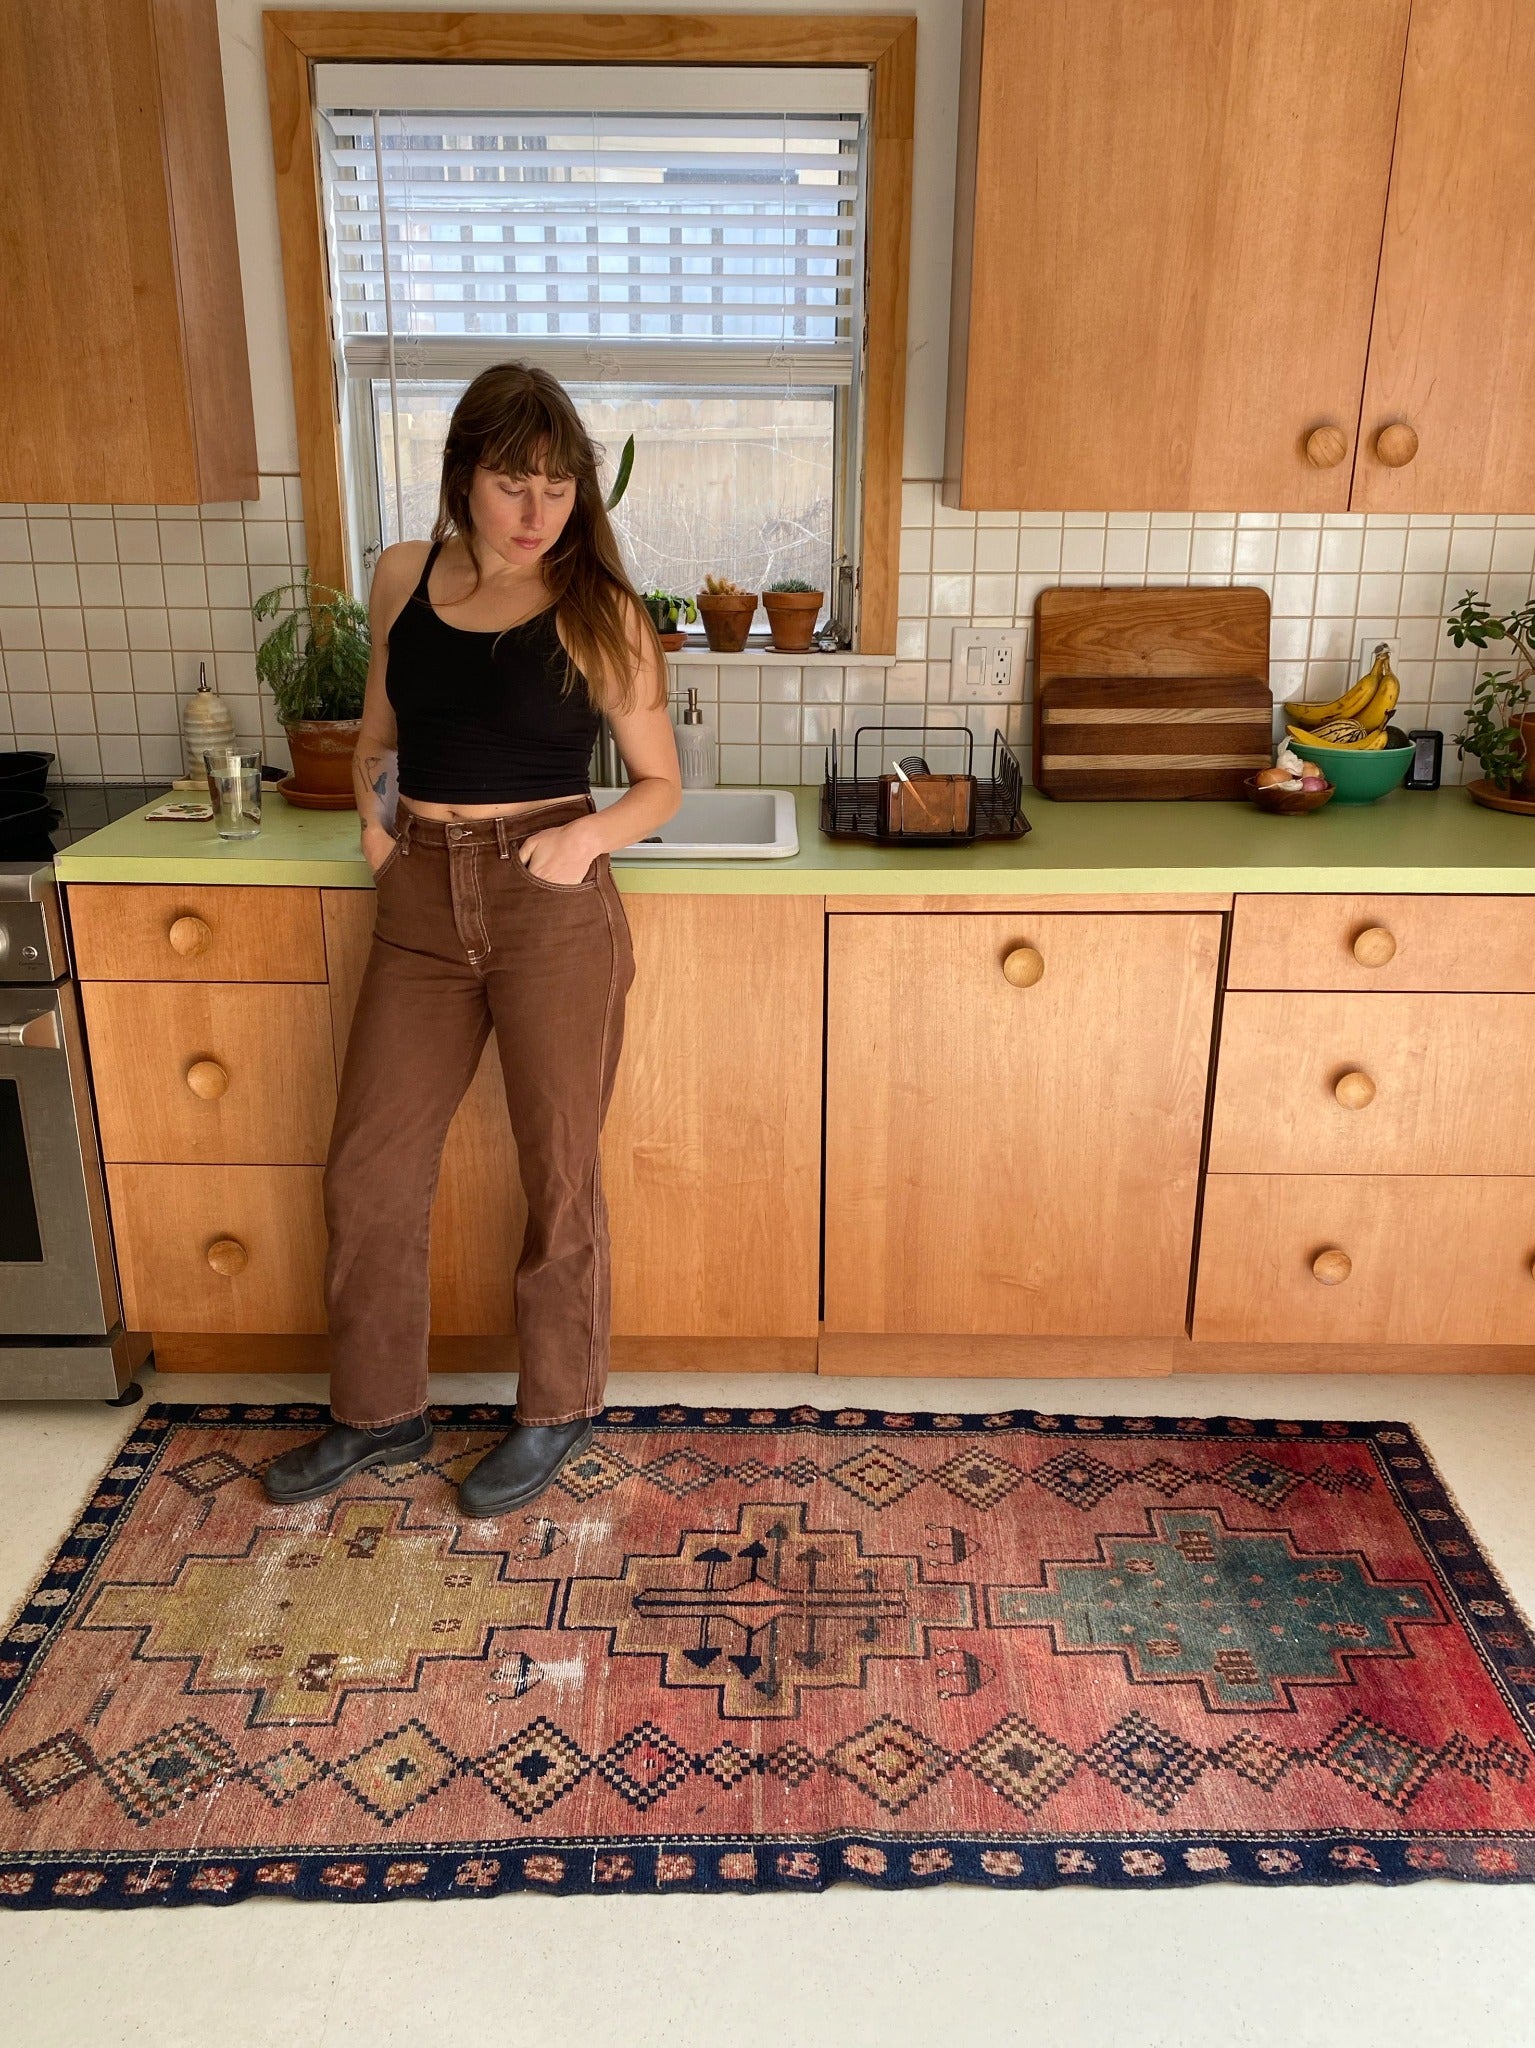 See Santo Pink Vintage Persian Rug in a Kitchen